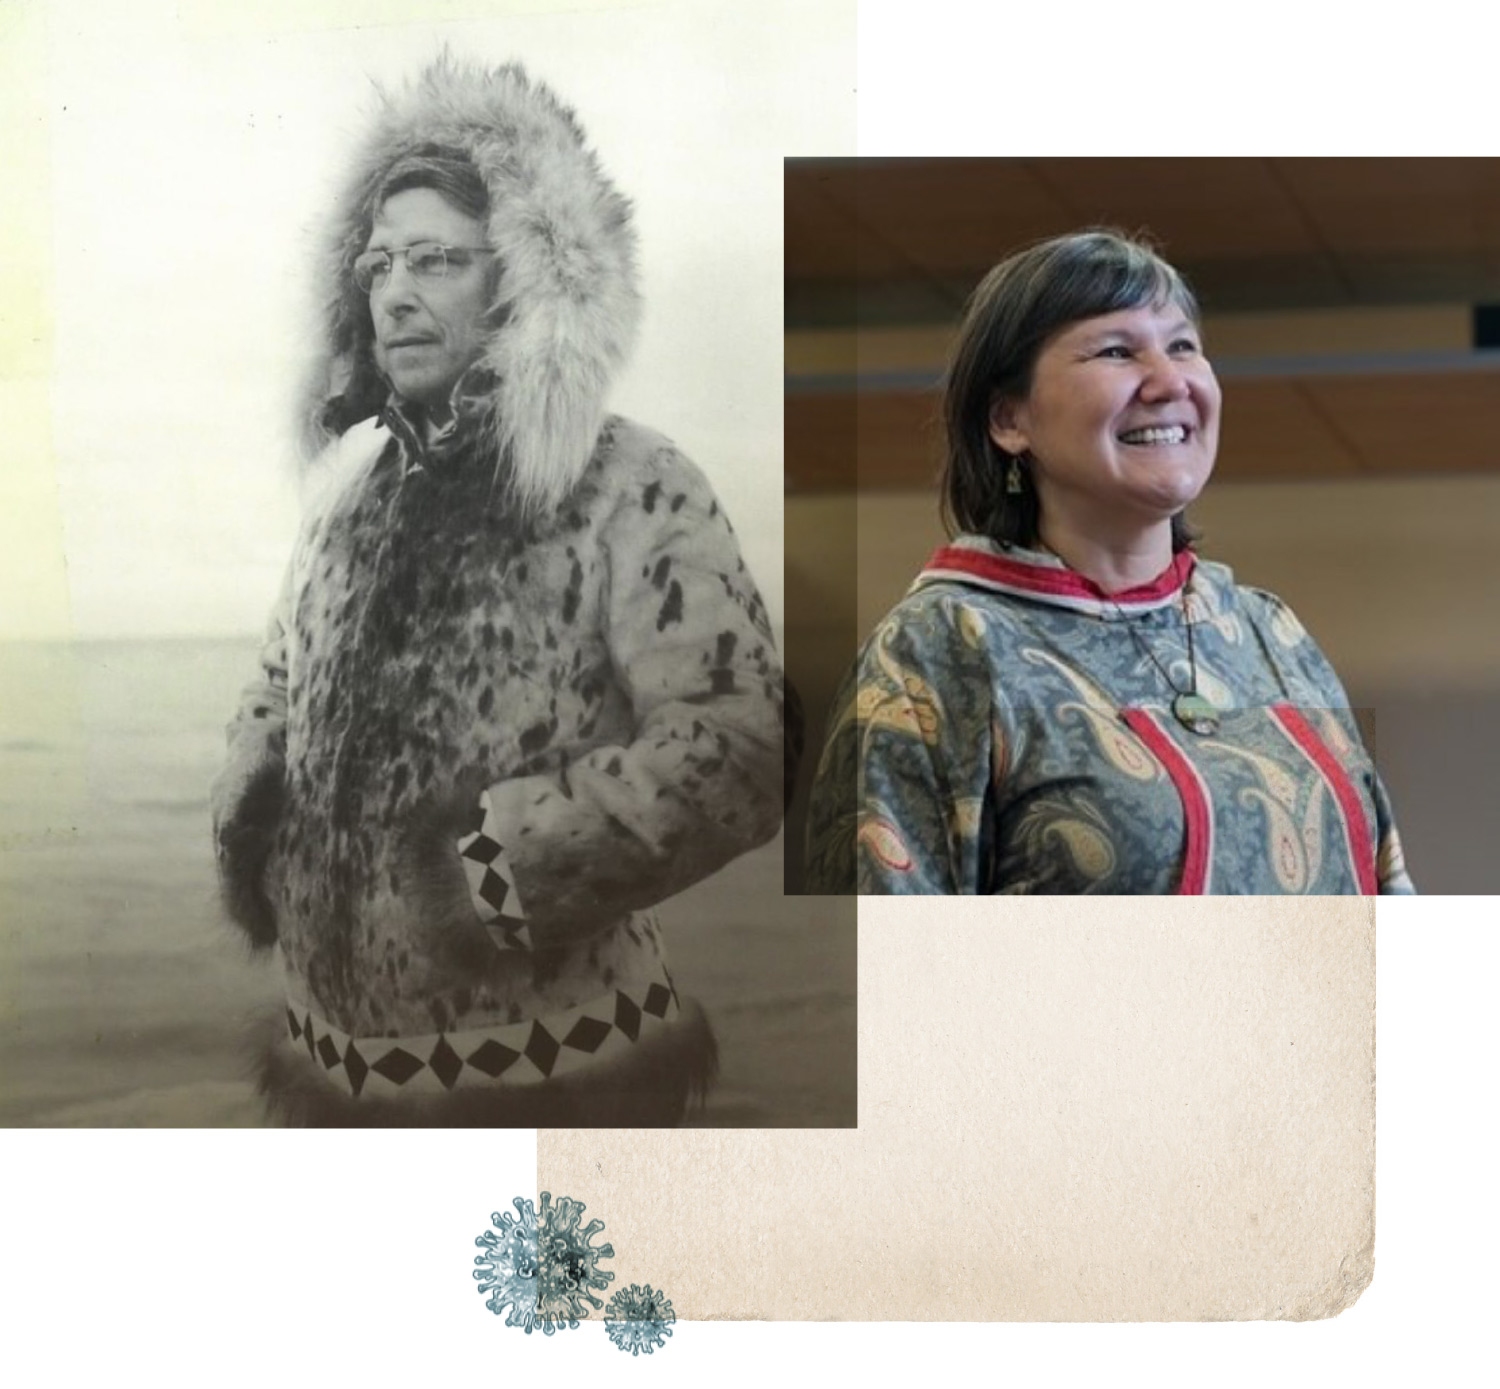 Peter Gordon Gould and Valerie Nurr’araaluk Davidson photos side by side with paper texture and two small viruses